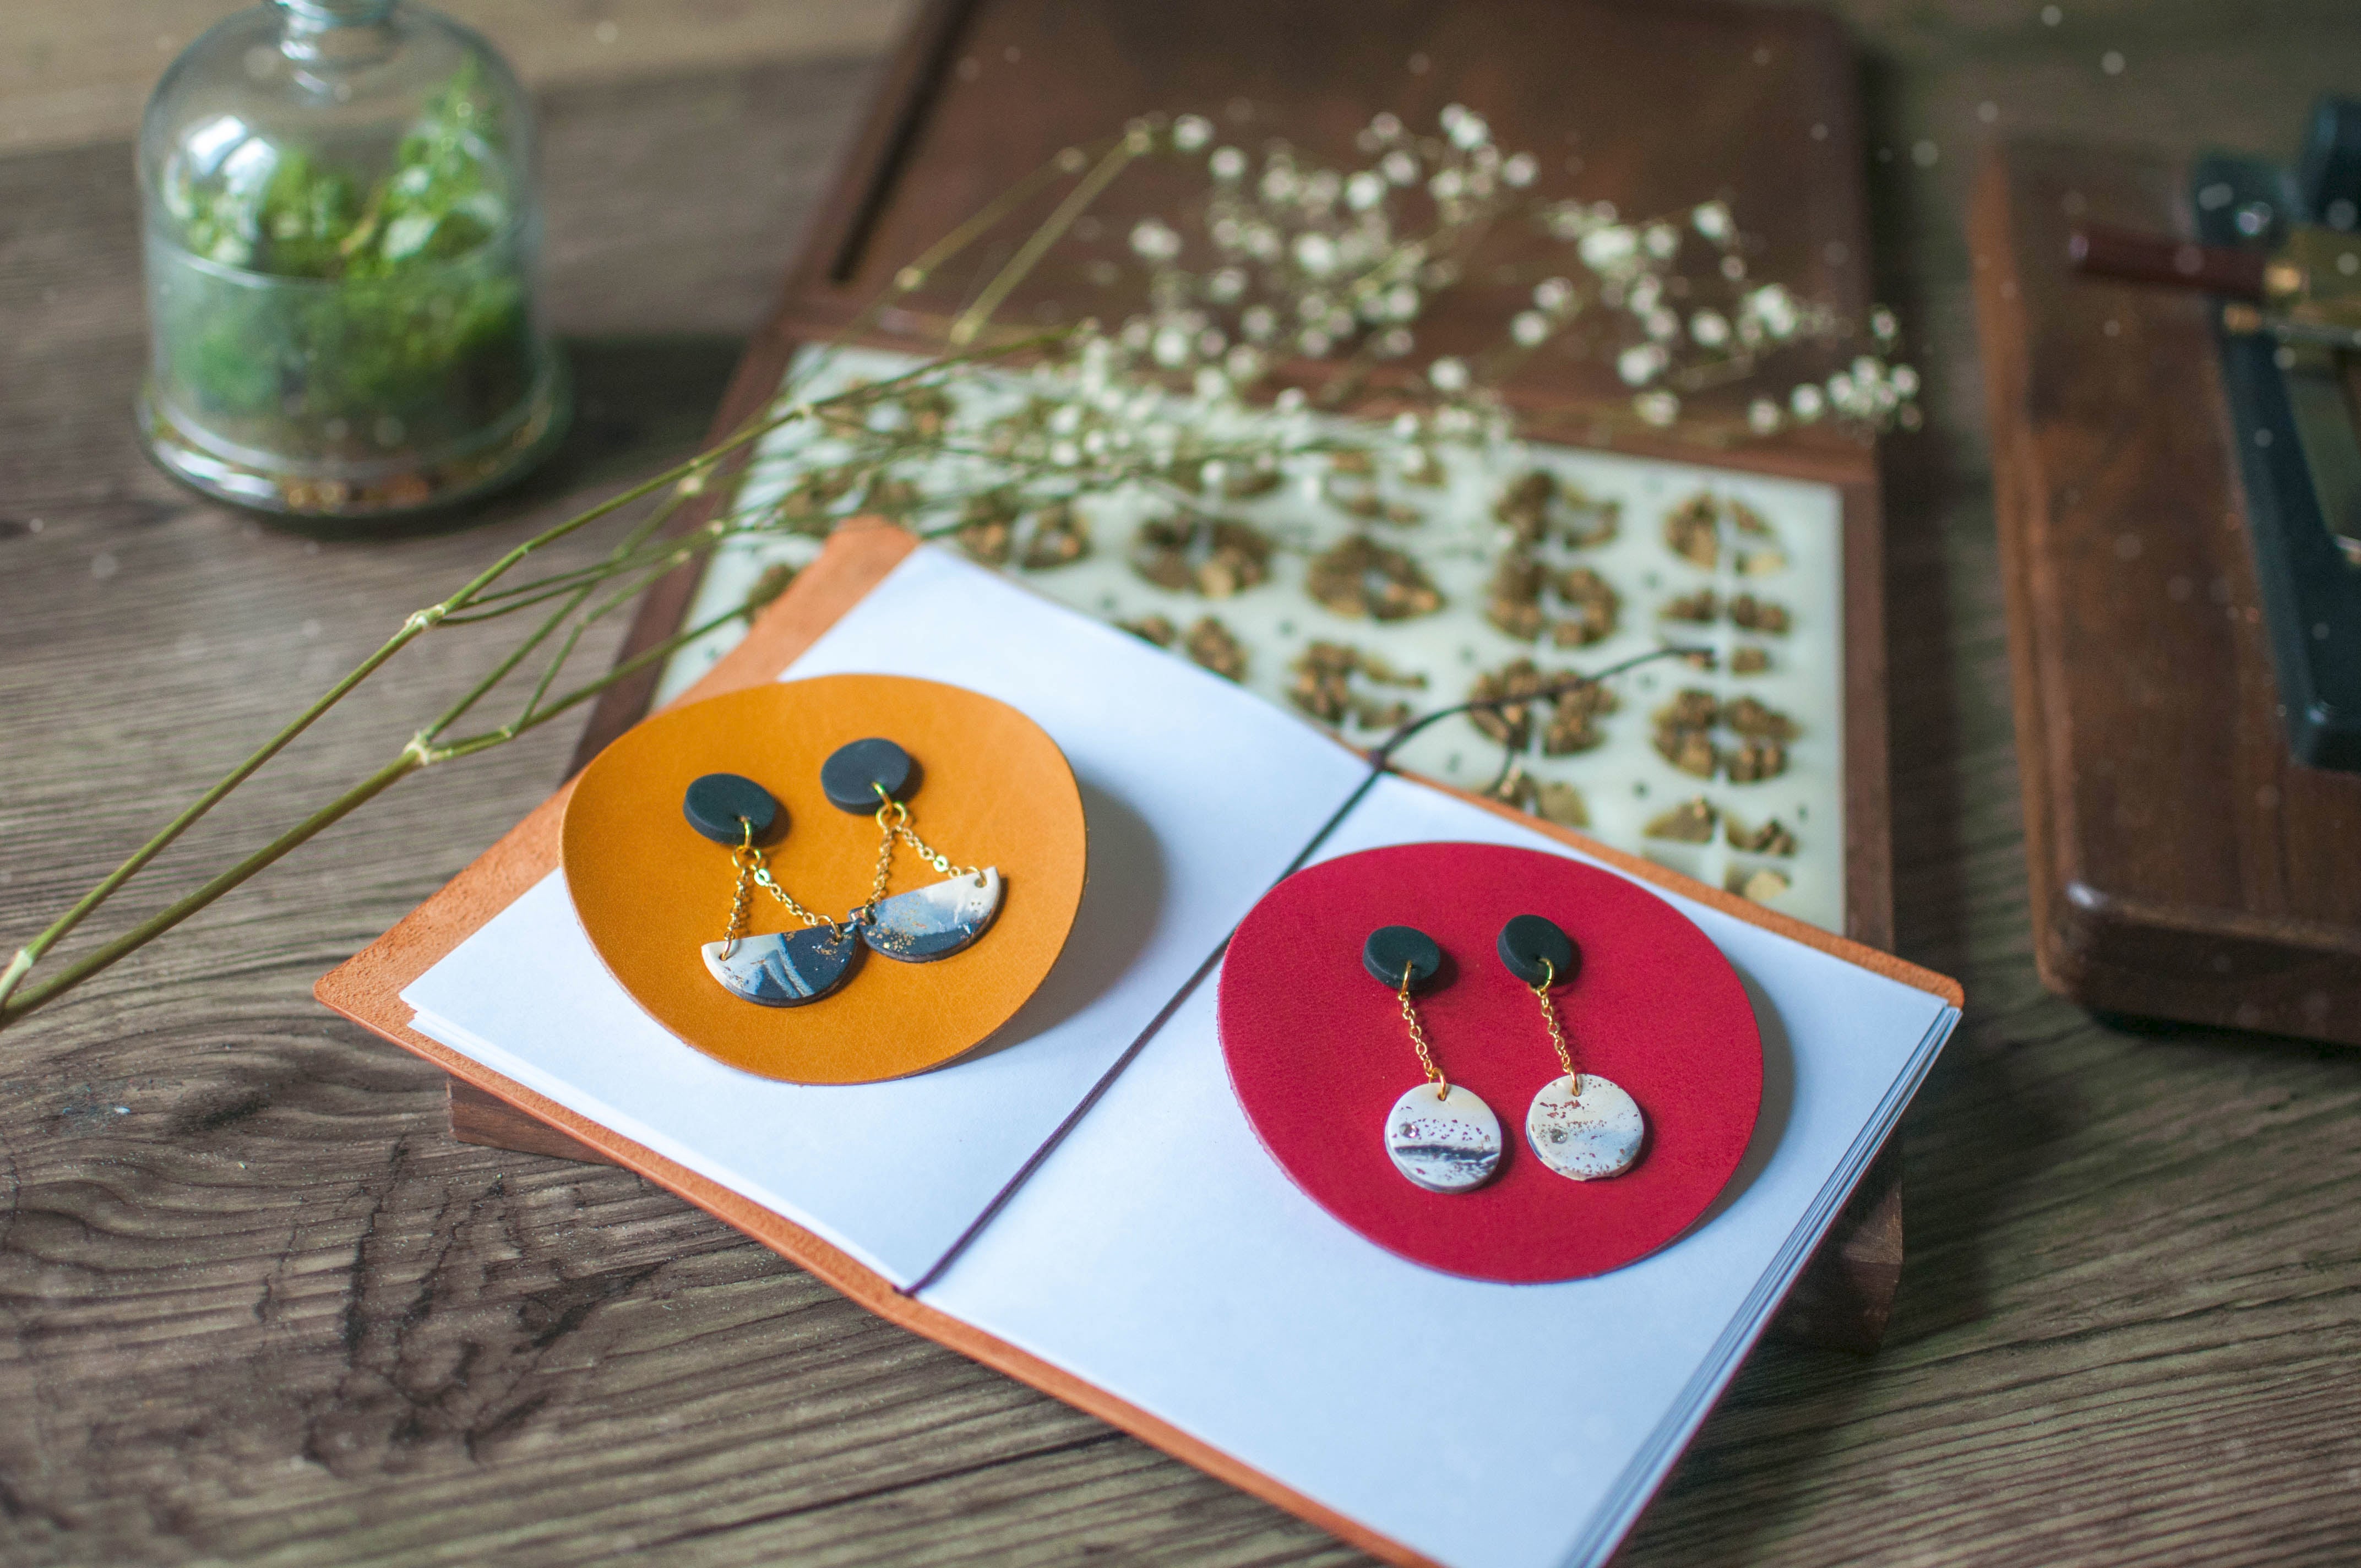 Polymer Clay Earring and Leather Journal Making - Crafune x Tinkle Arts (26th Sep, 11.15am) - Crafune